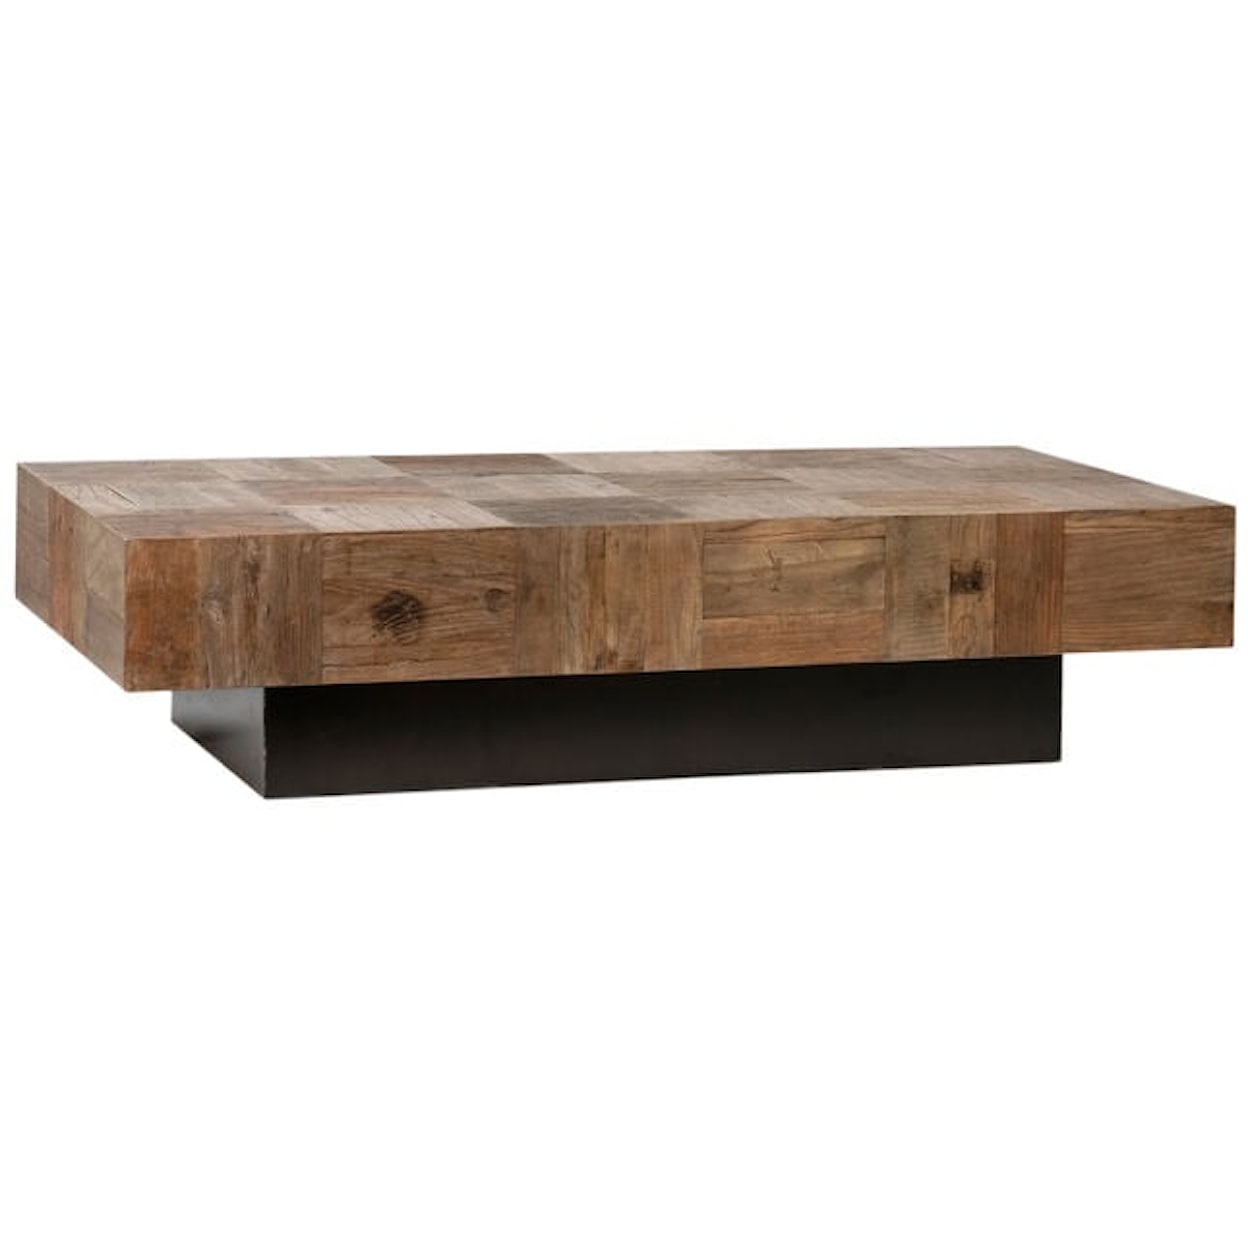 Dovetail Furniture Coffee Tables POWELL COFFEE TABLE